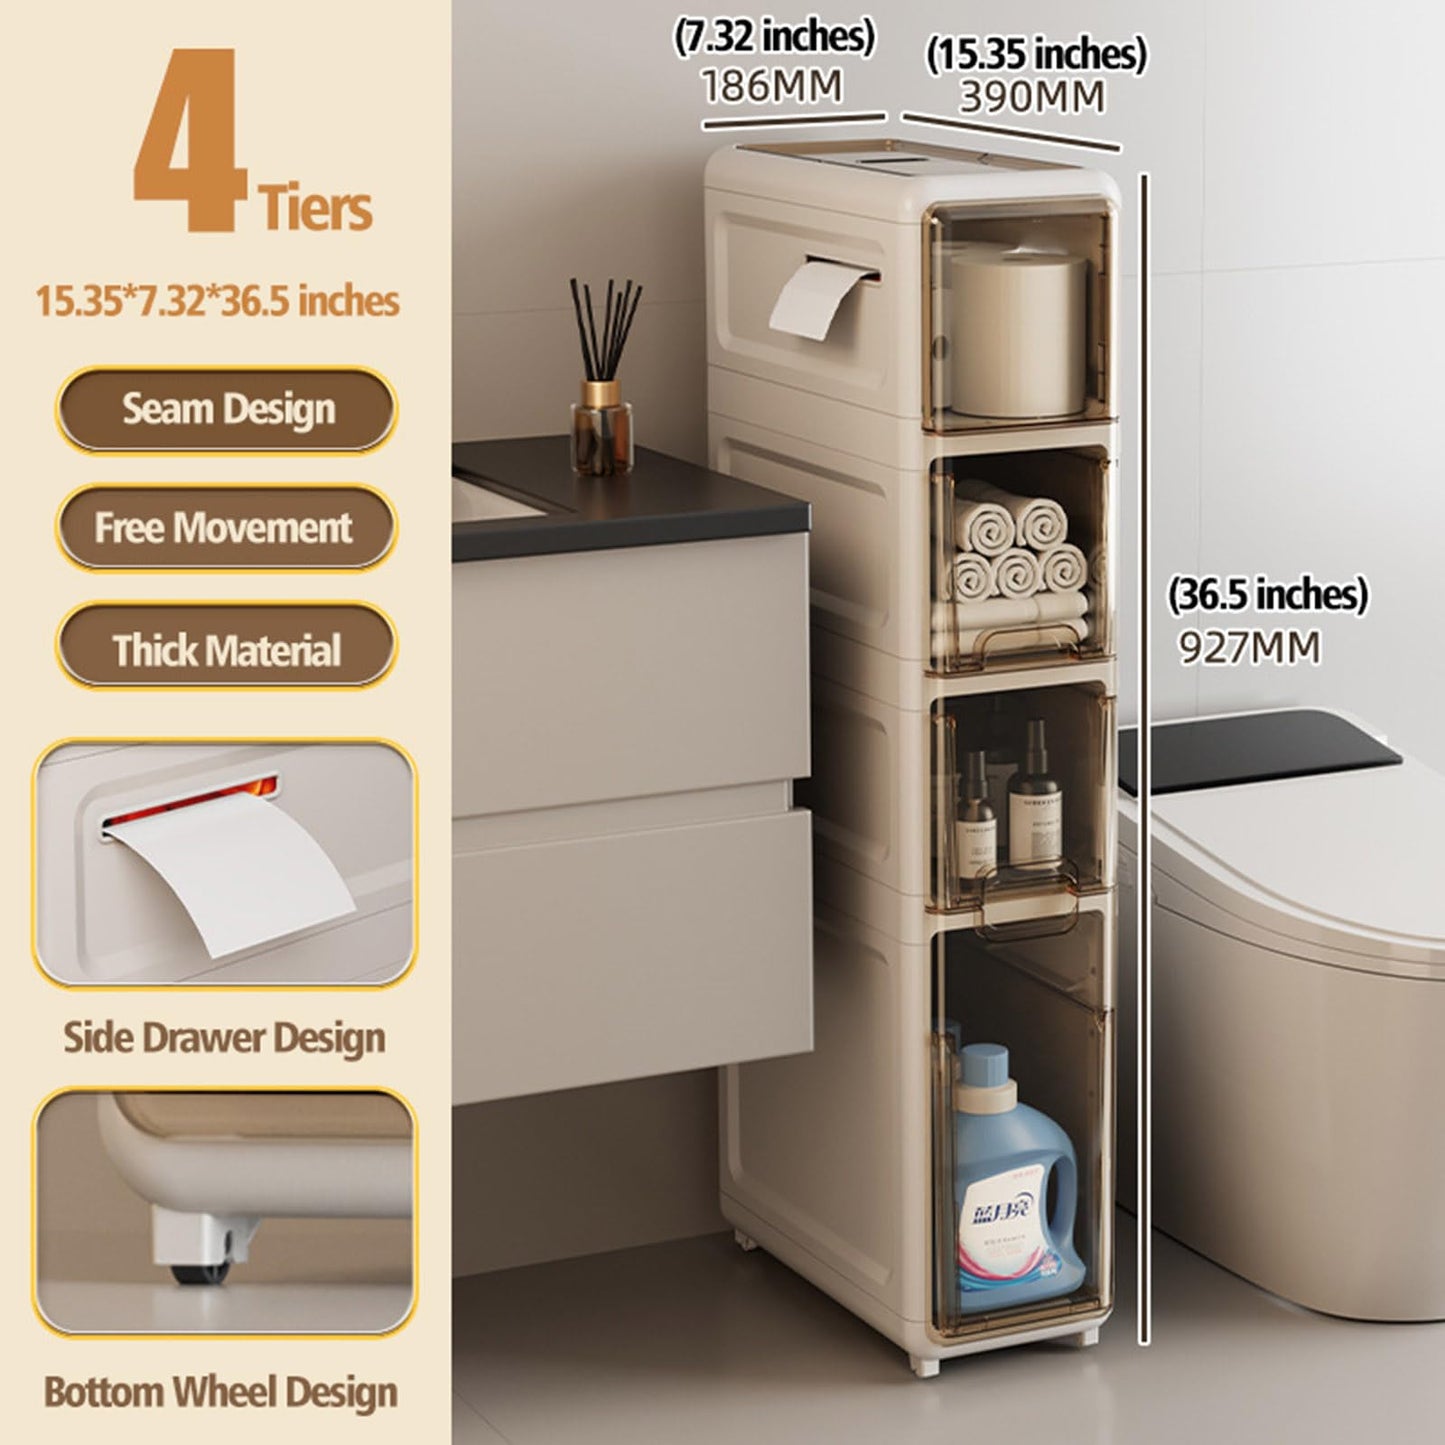 Slim Bathroom Storage Cabinet with Clear Drawers Movable Side Narrow Organizer Unit Toilet Paper Holder Freestanding Shelve Box for Small Space Kitchen Laundry Gap - Already Assembled (4-Tiers)